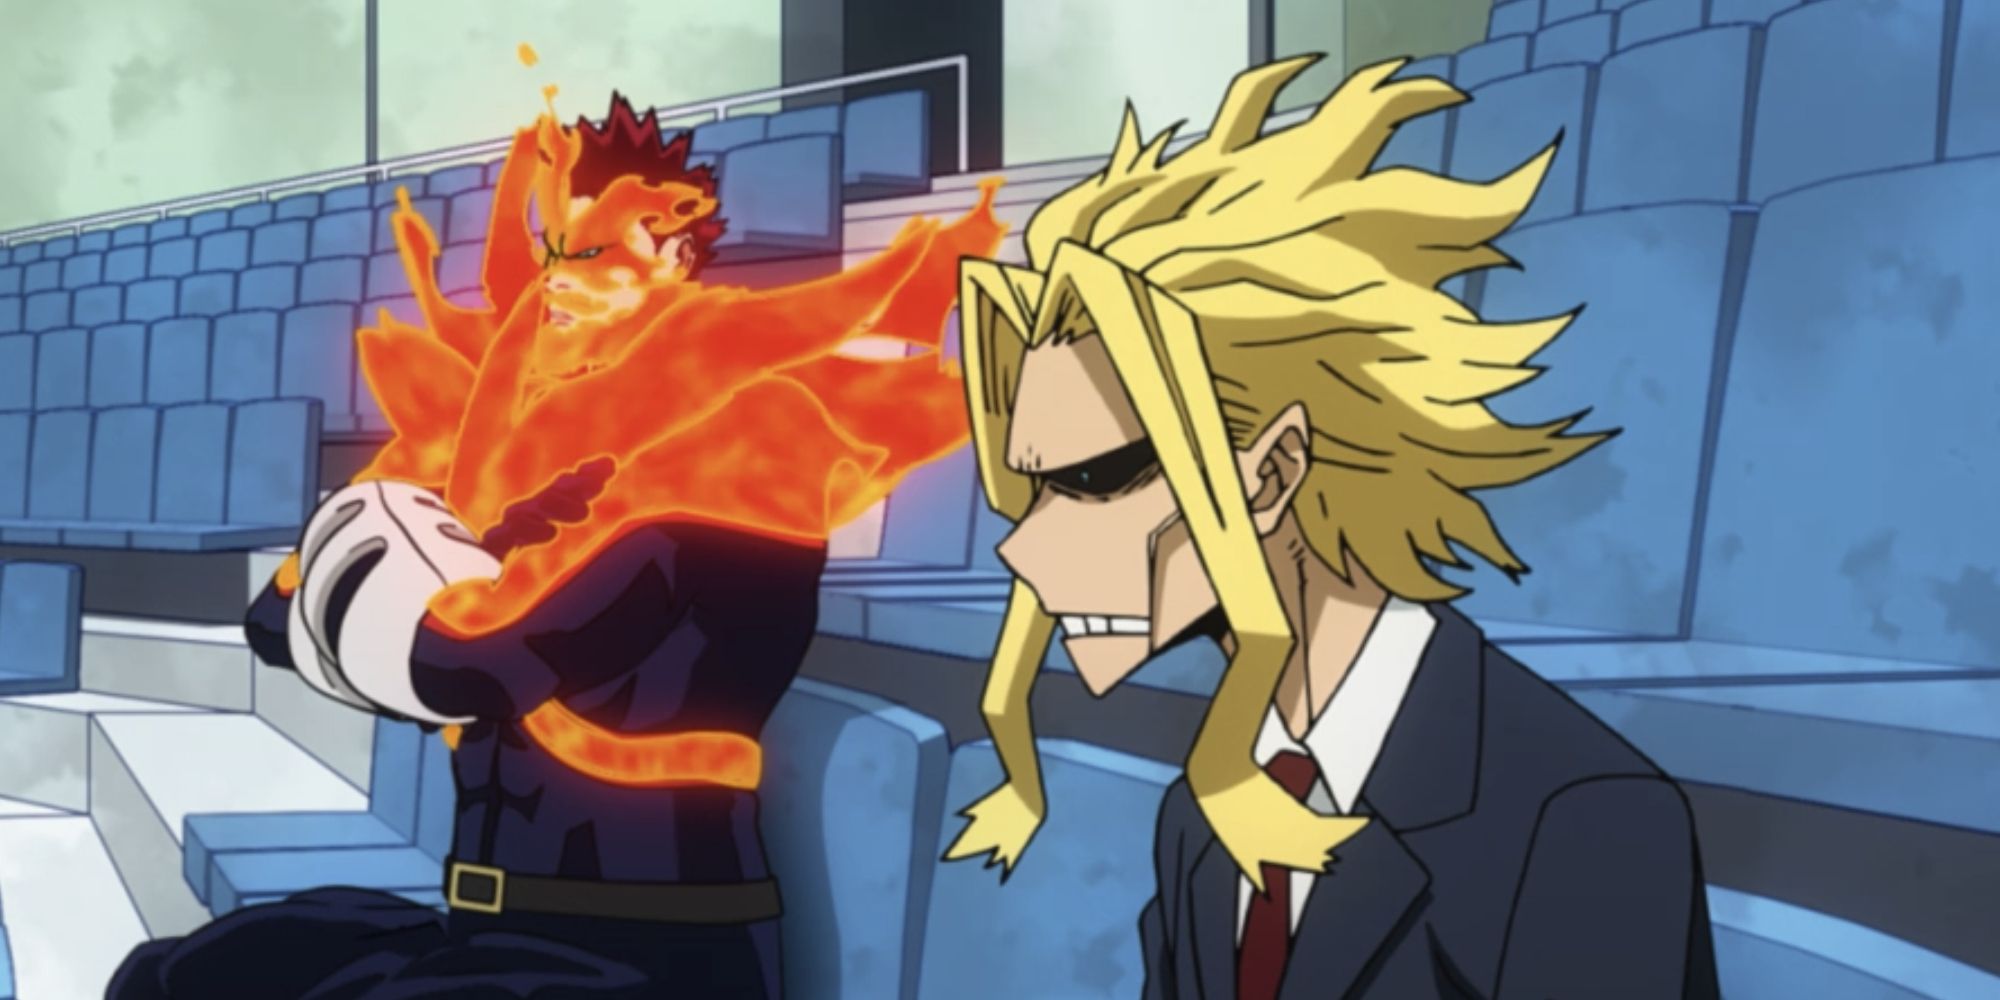 Endeavor and All Might sitting MHA